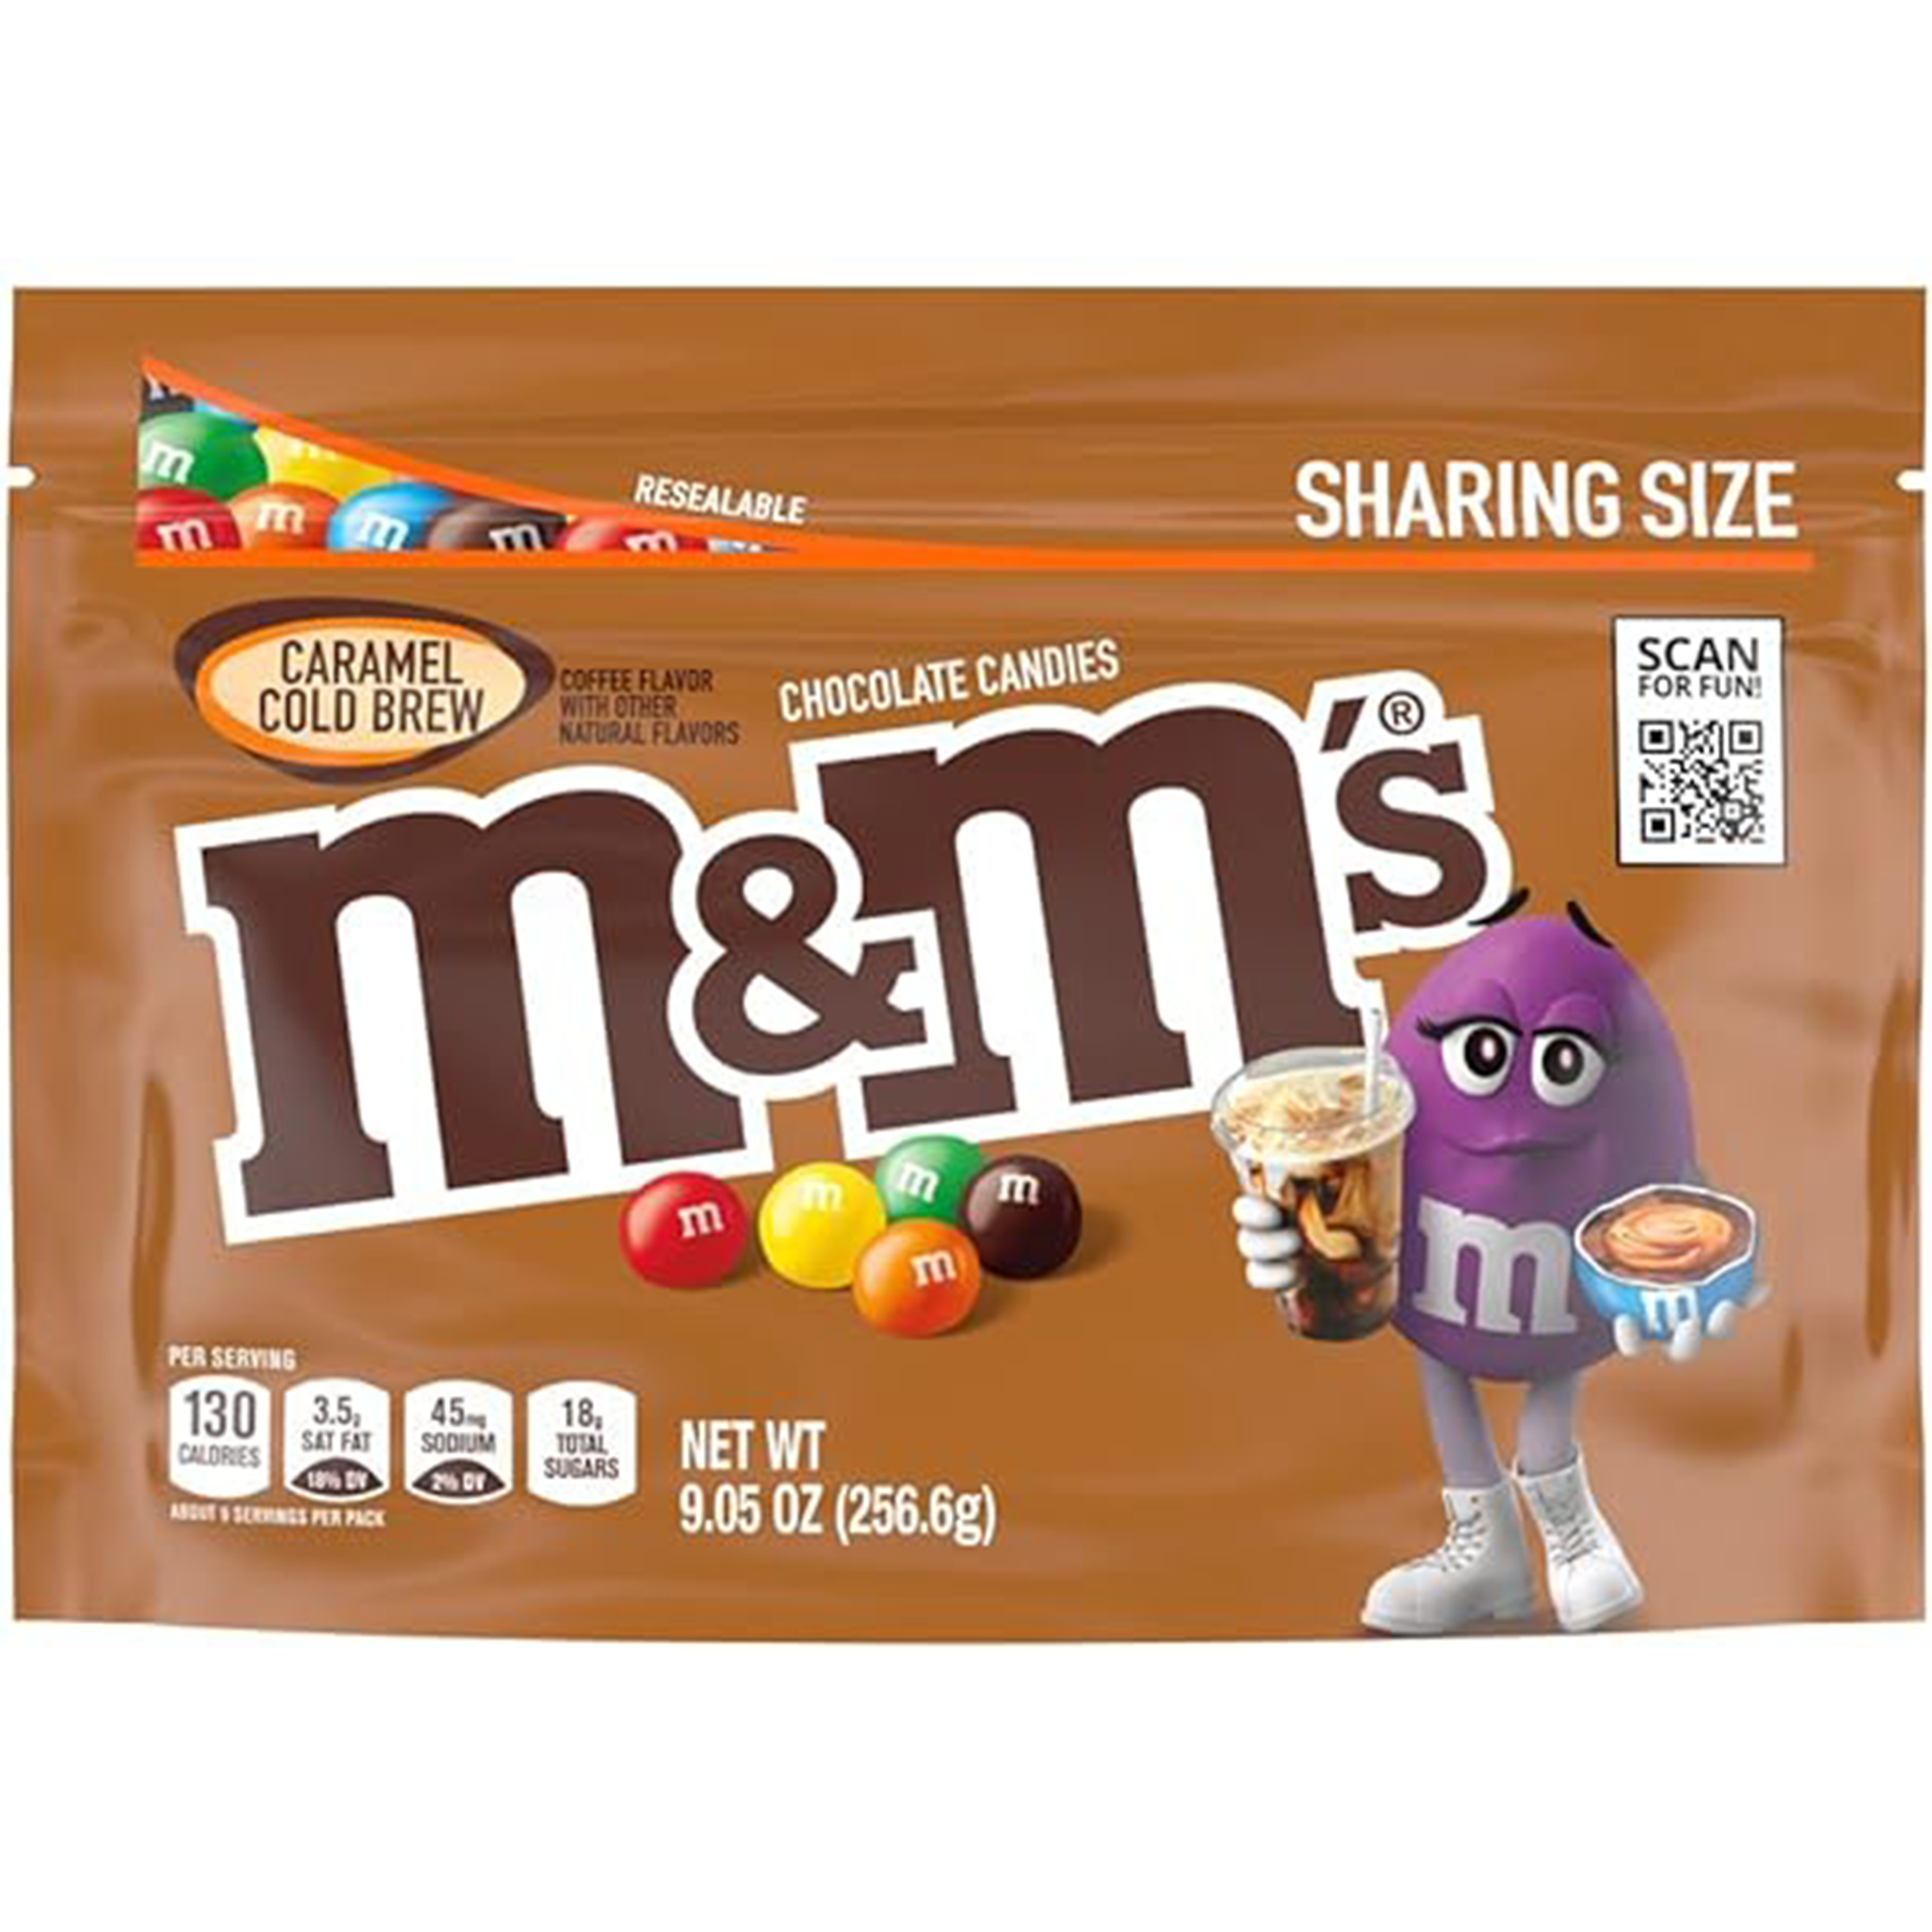 M&M's - Caramel Cold Brew (Share Size)